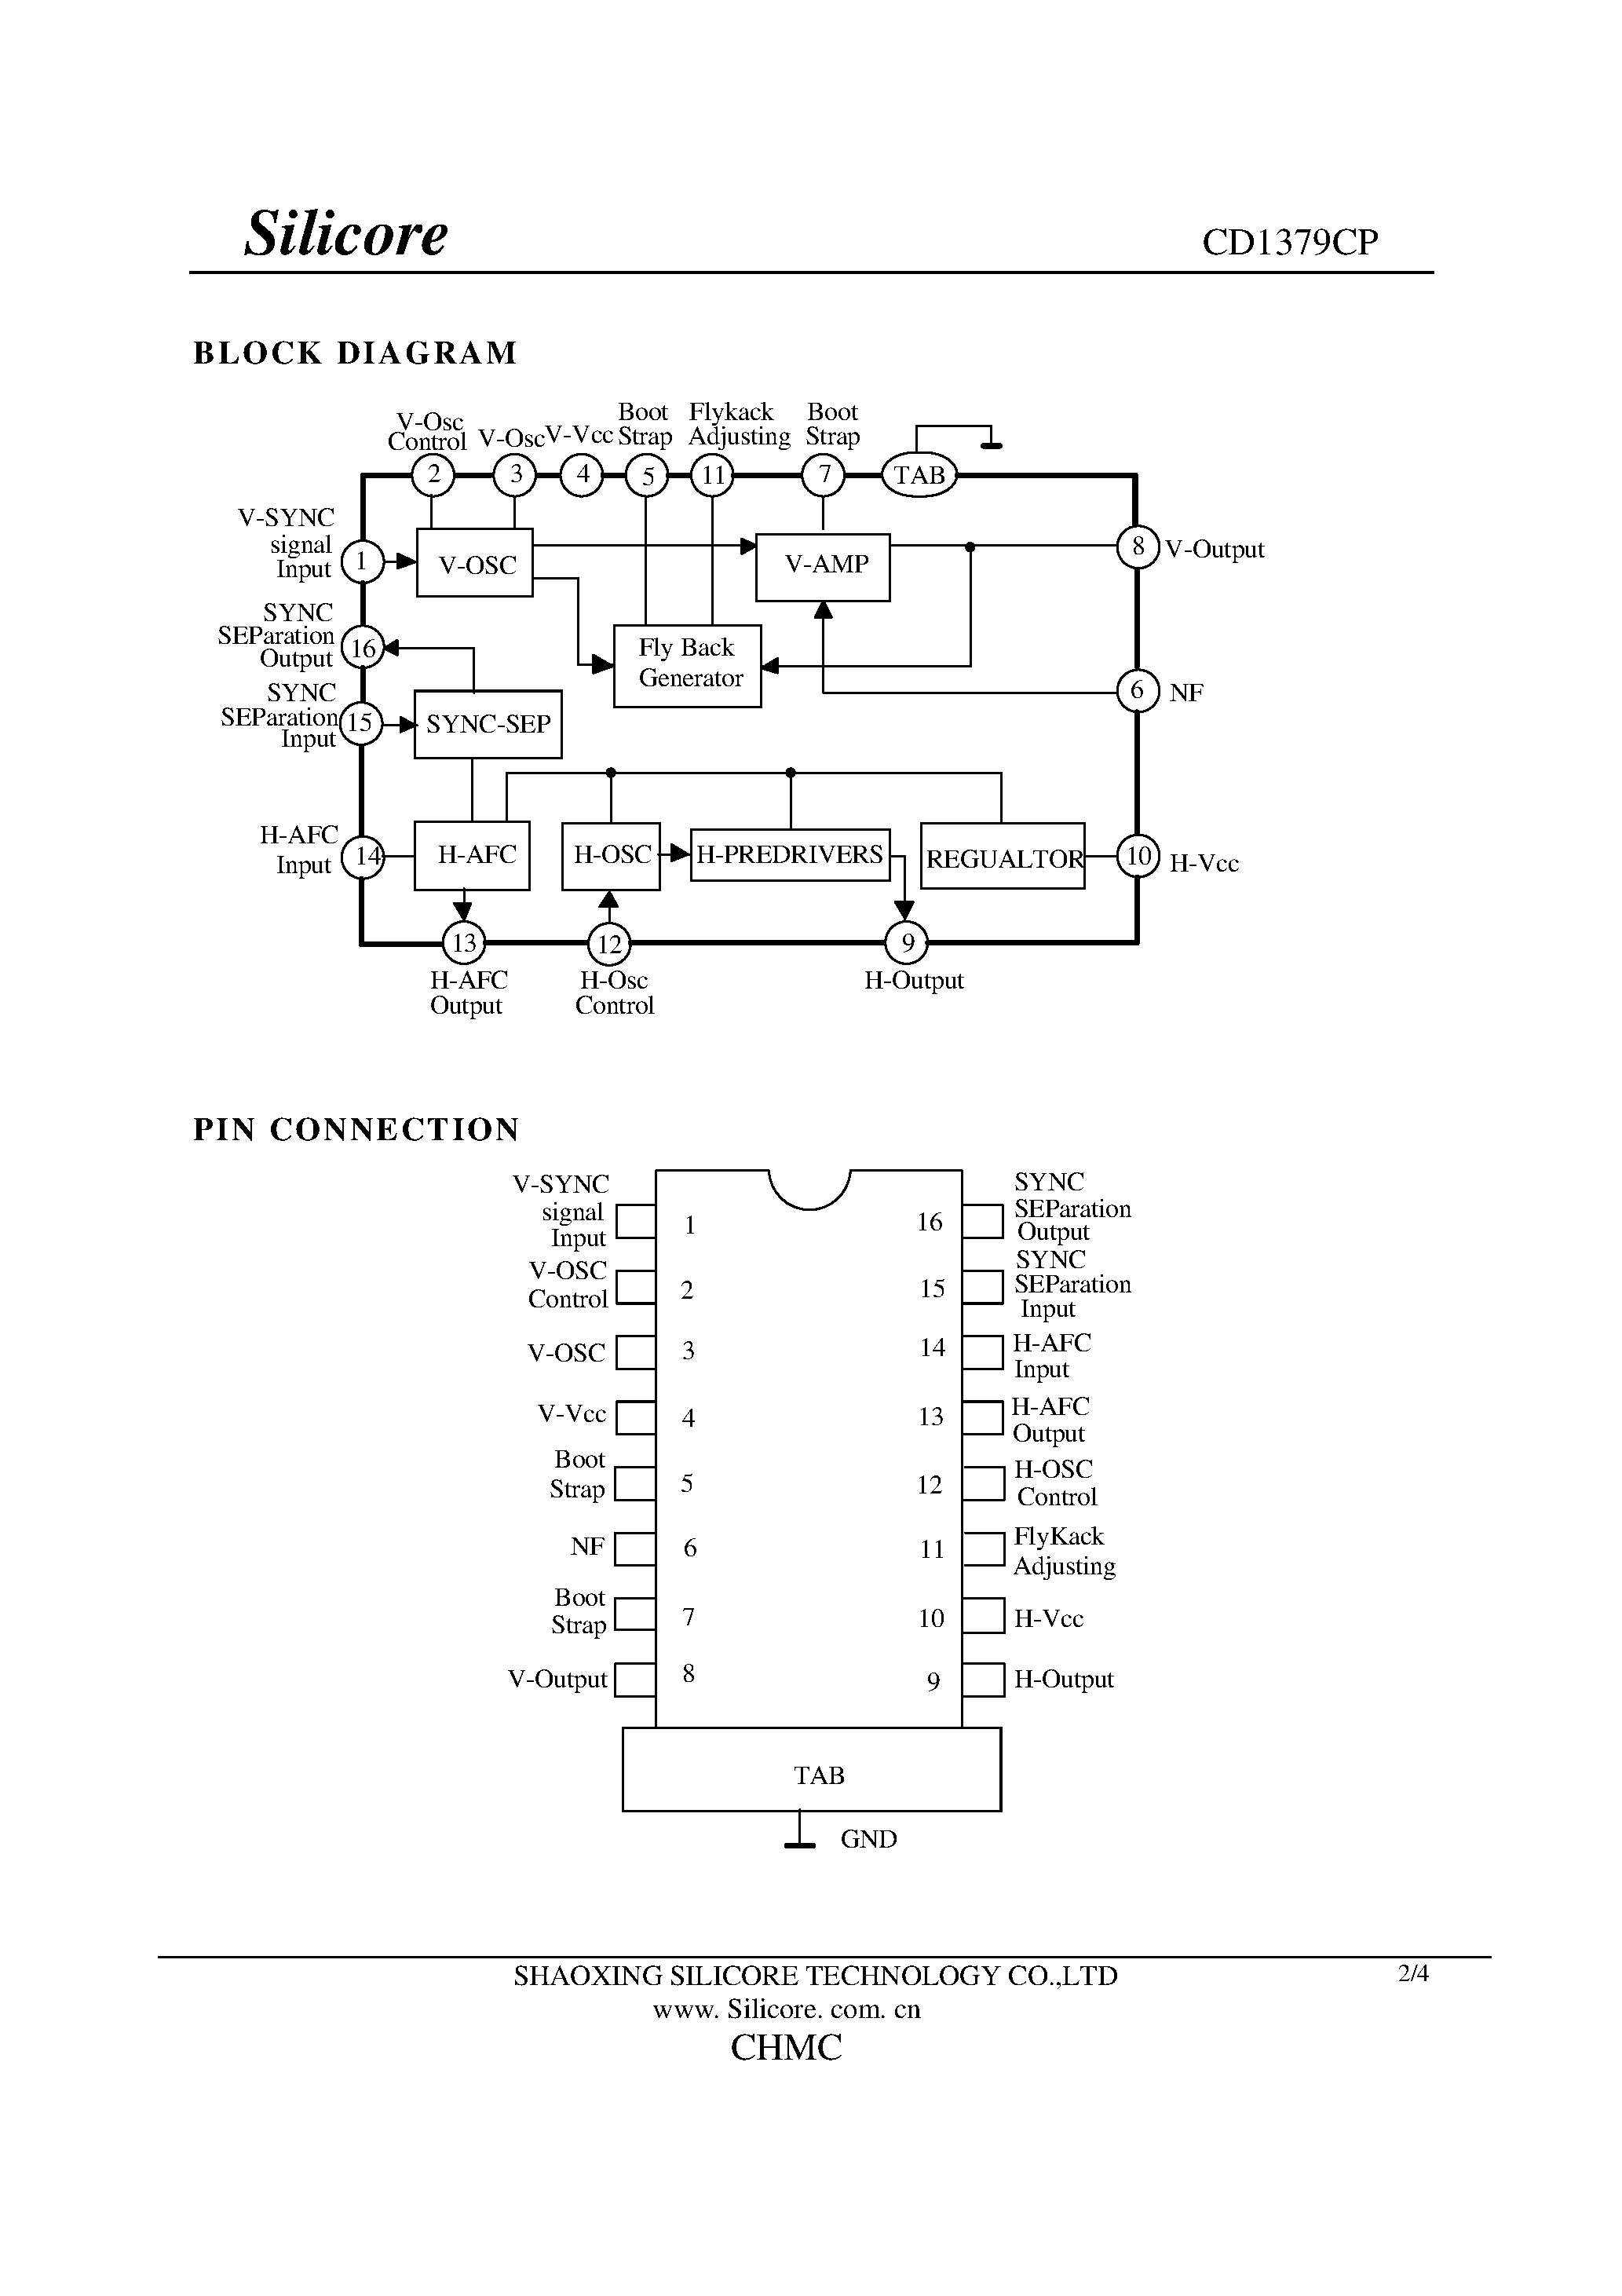 Datasheet CD1379CP - 1-Chip Defection System page 2